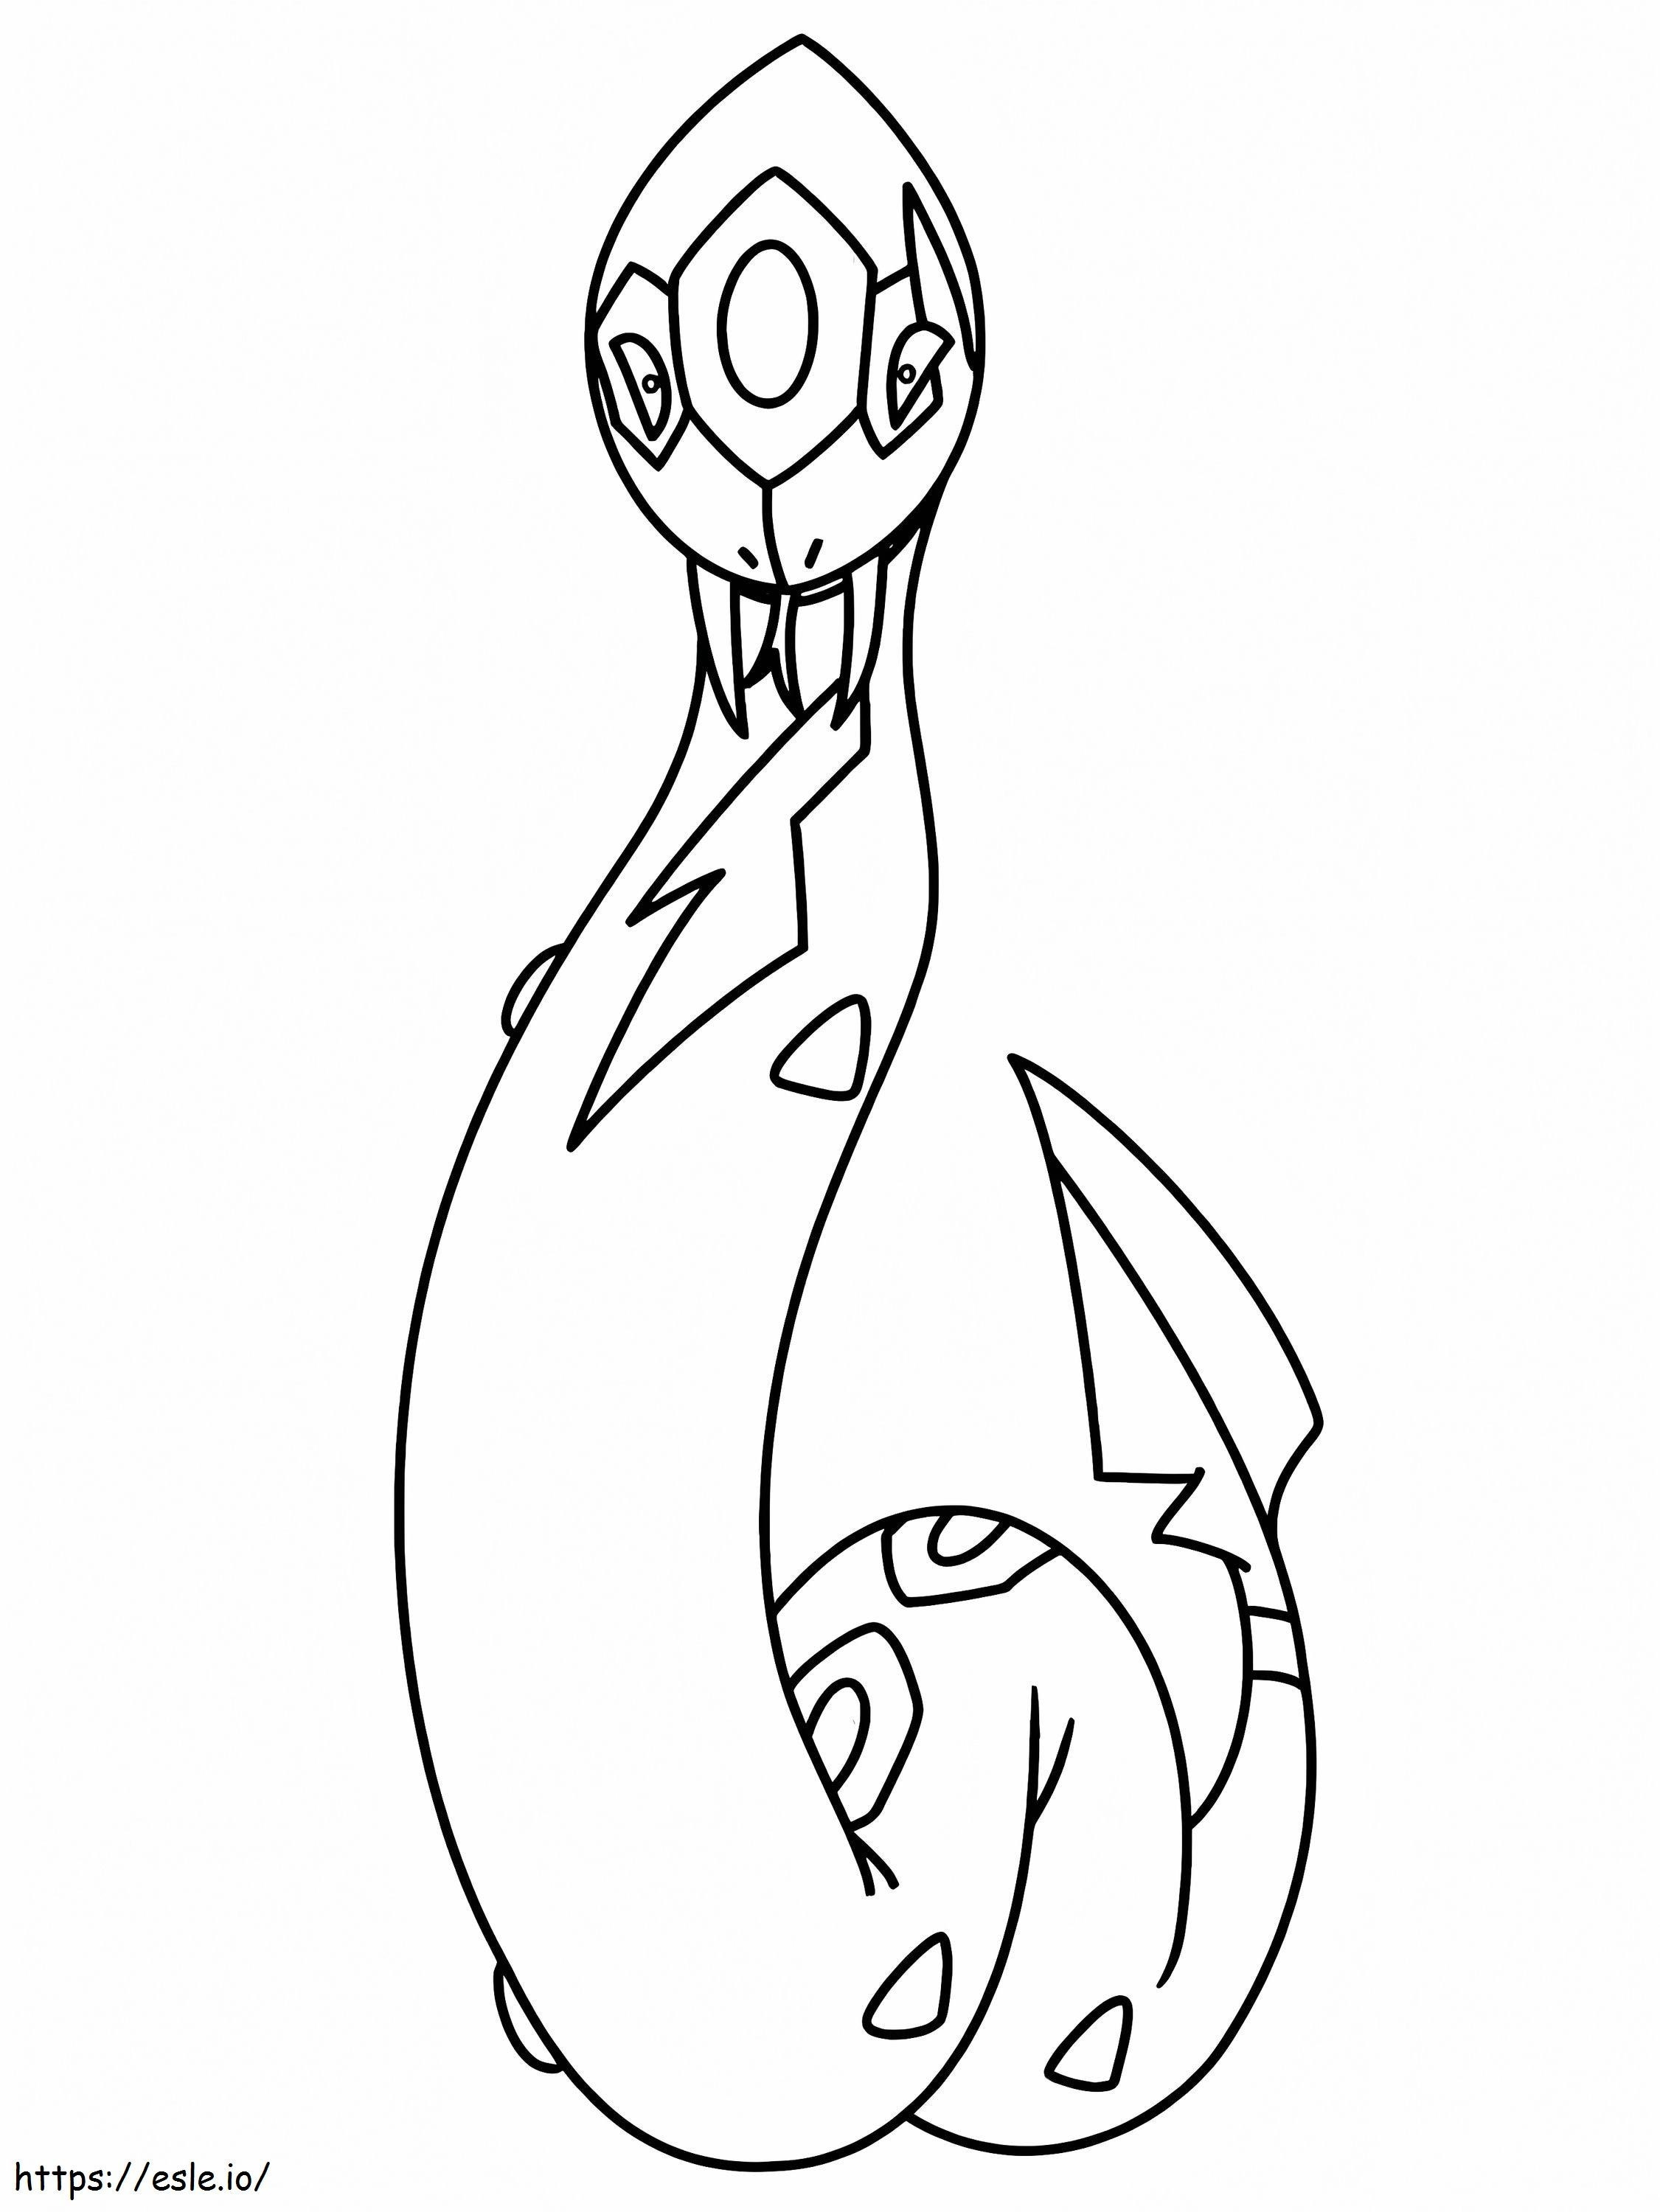 Seviper coloring page